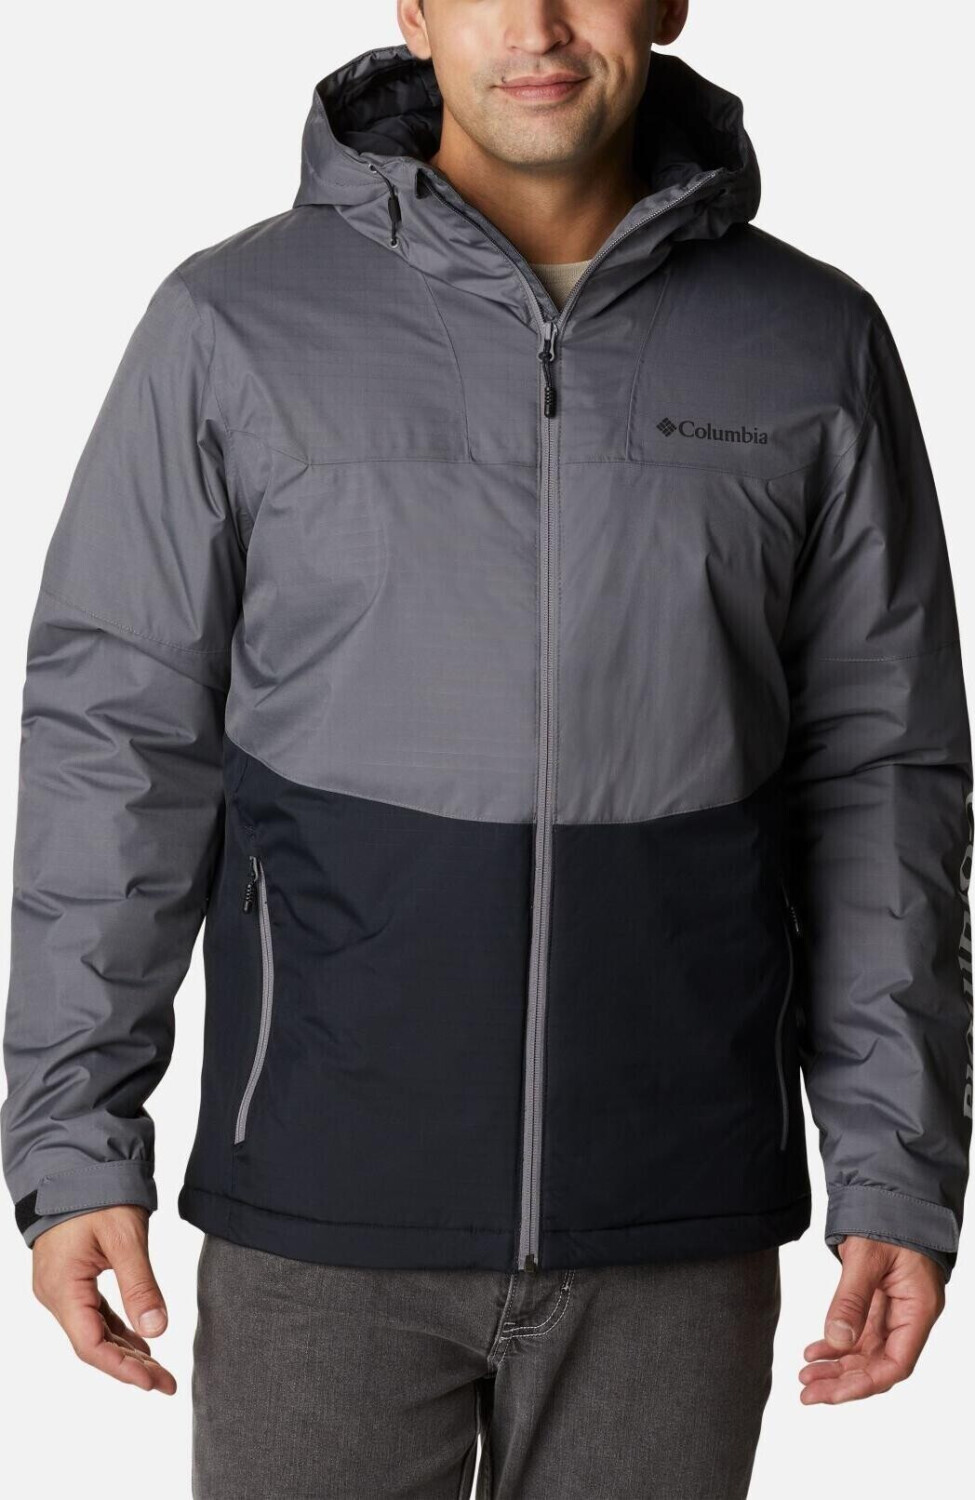 Buy Columbia Point Park Insulated Waterproof Jacket Men (1956811) city  grey/black from £72.50 (Today) – Best Deals on